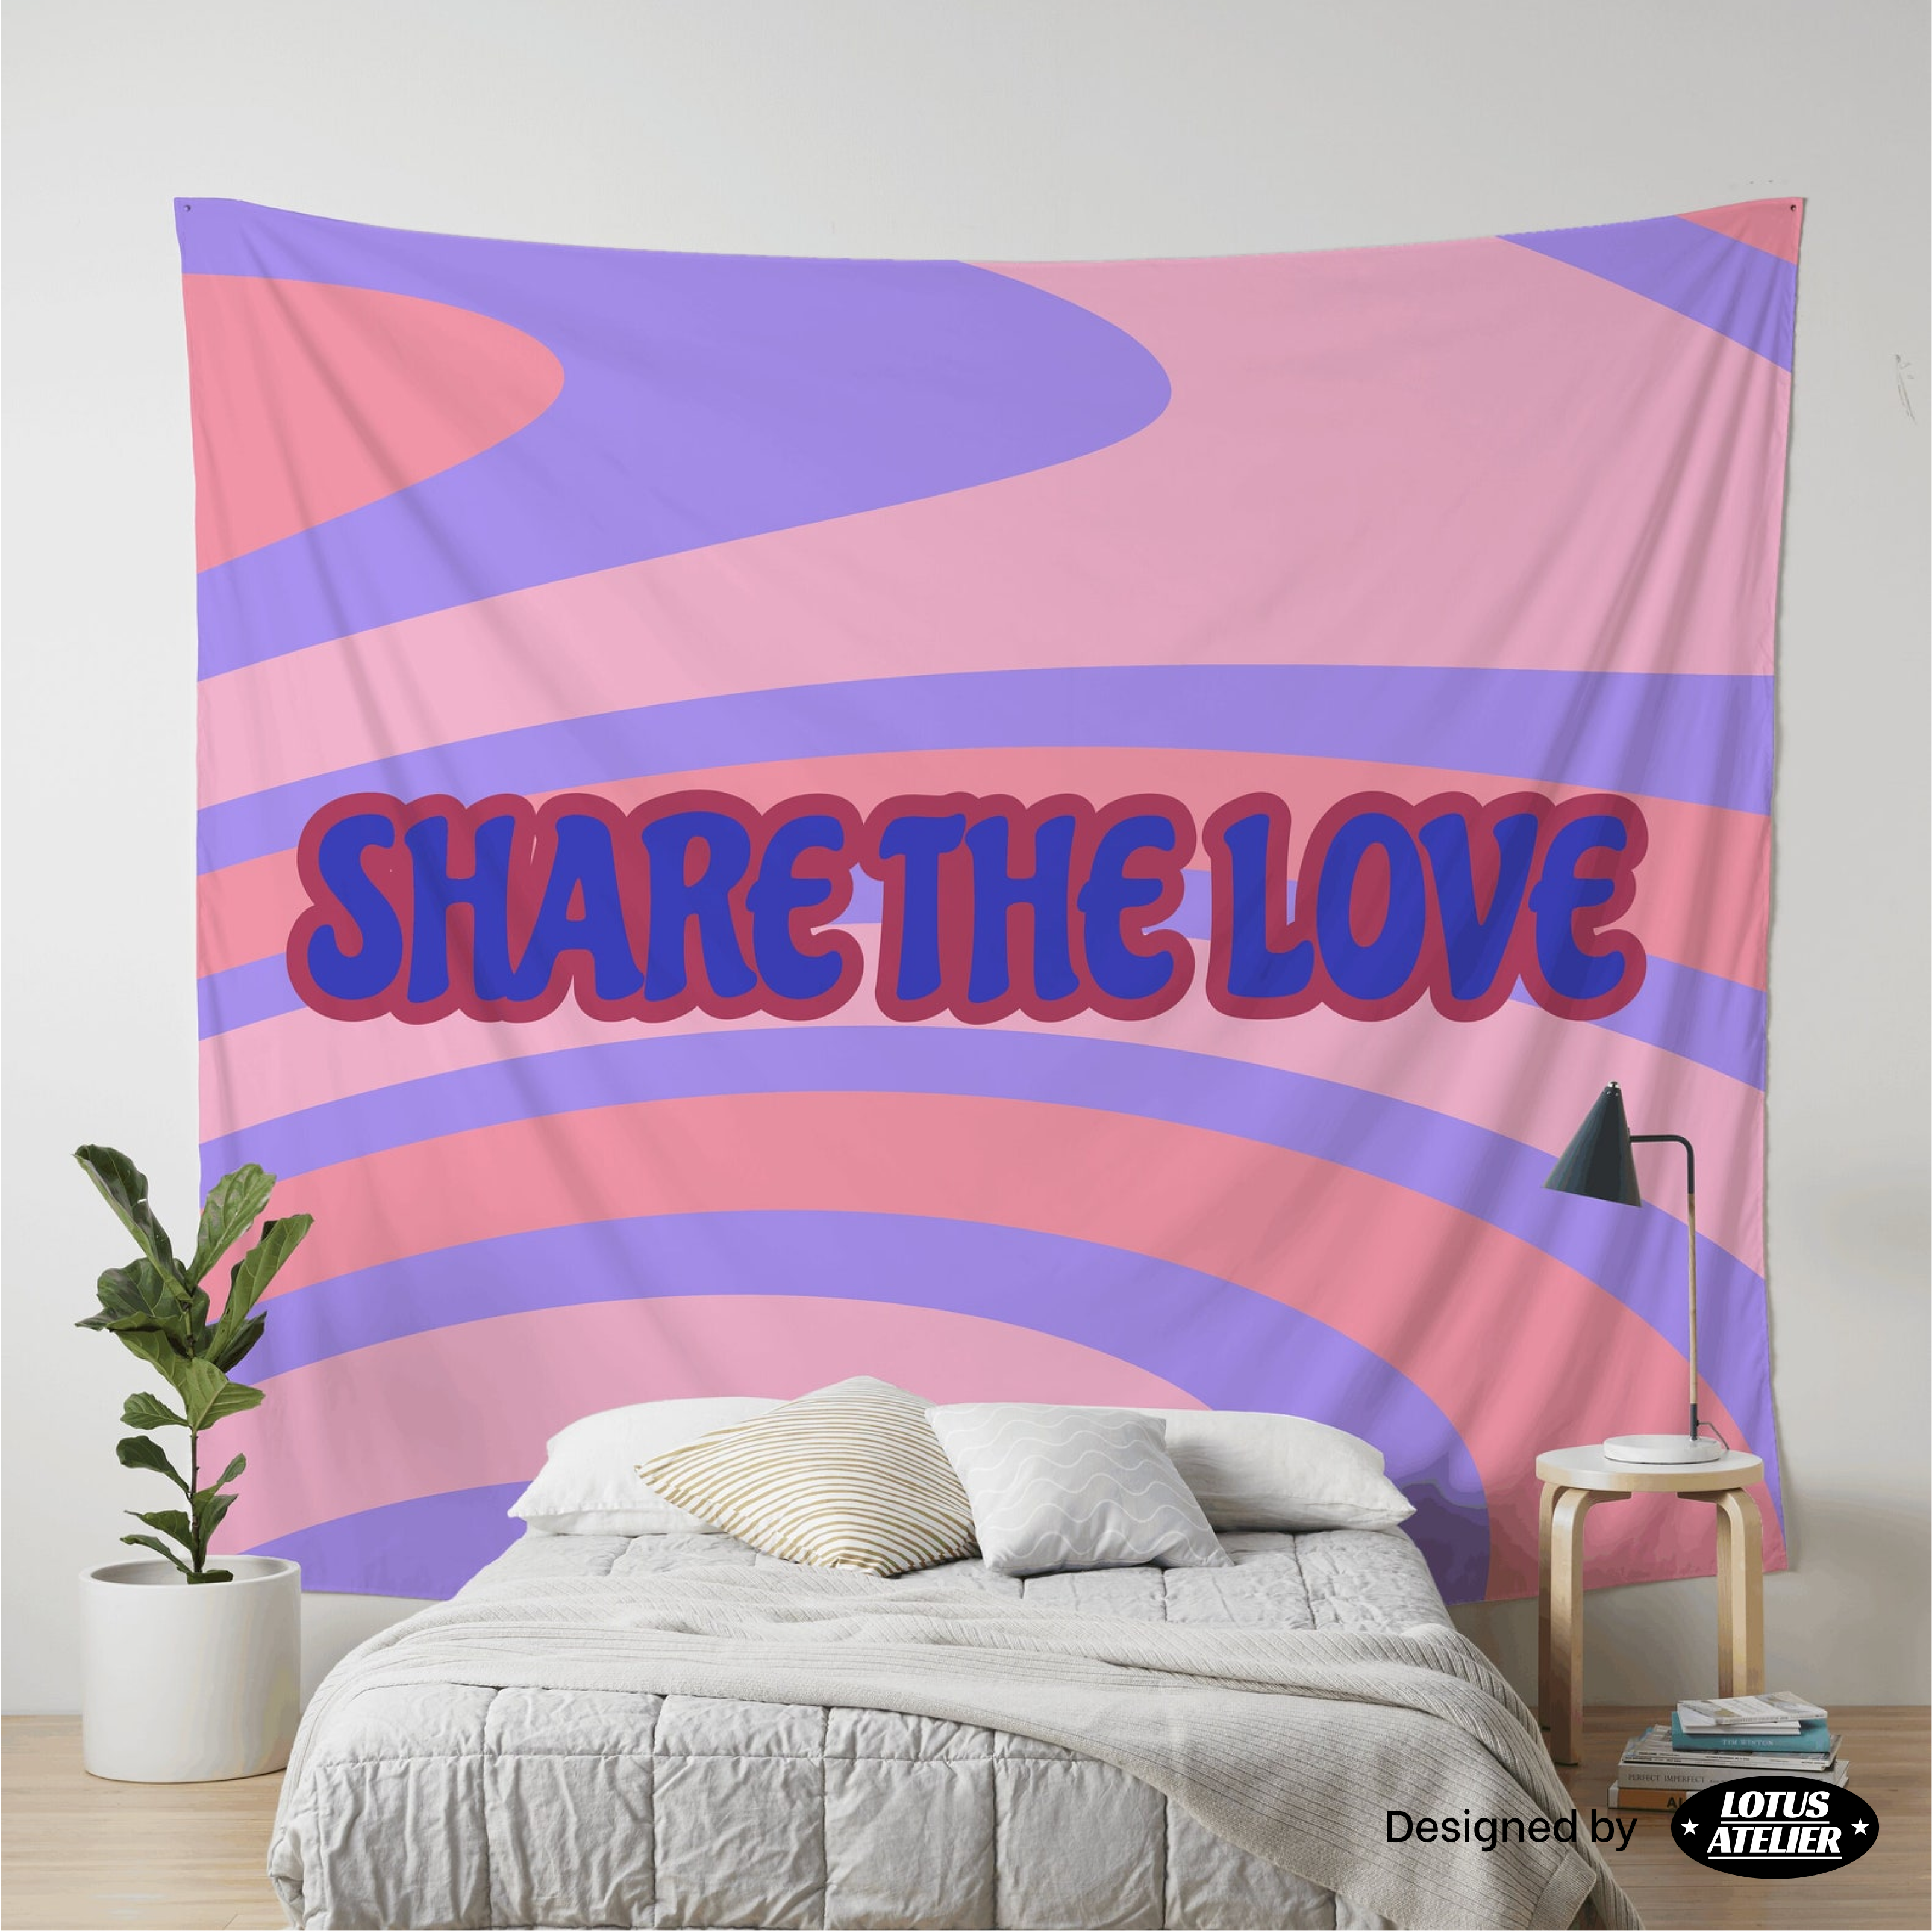 Share the love Groovy tapestry 70s Vibe | Hippie college girls dorm room decor | Cool Tapestries | Multiple Sizes (36x26, 60x50, 80x68)